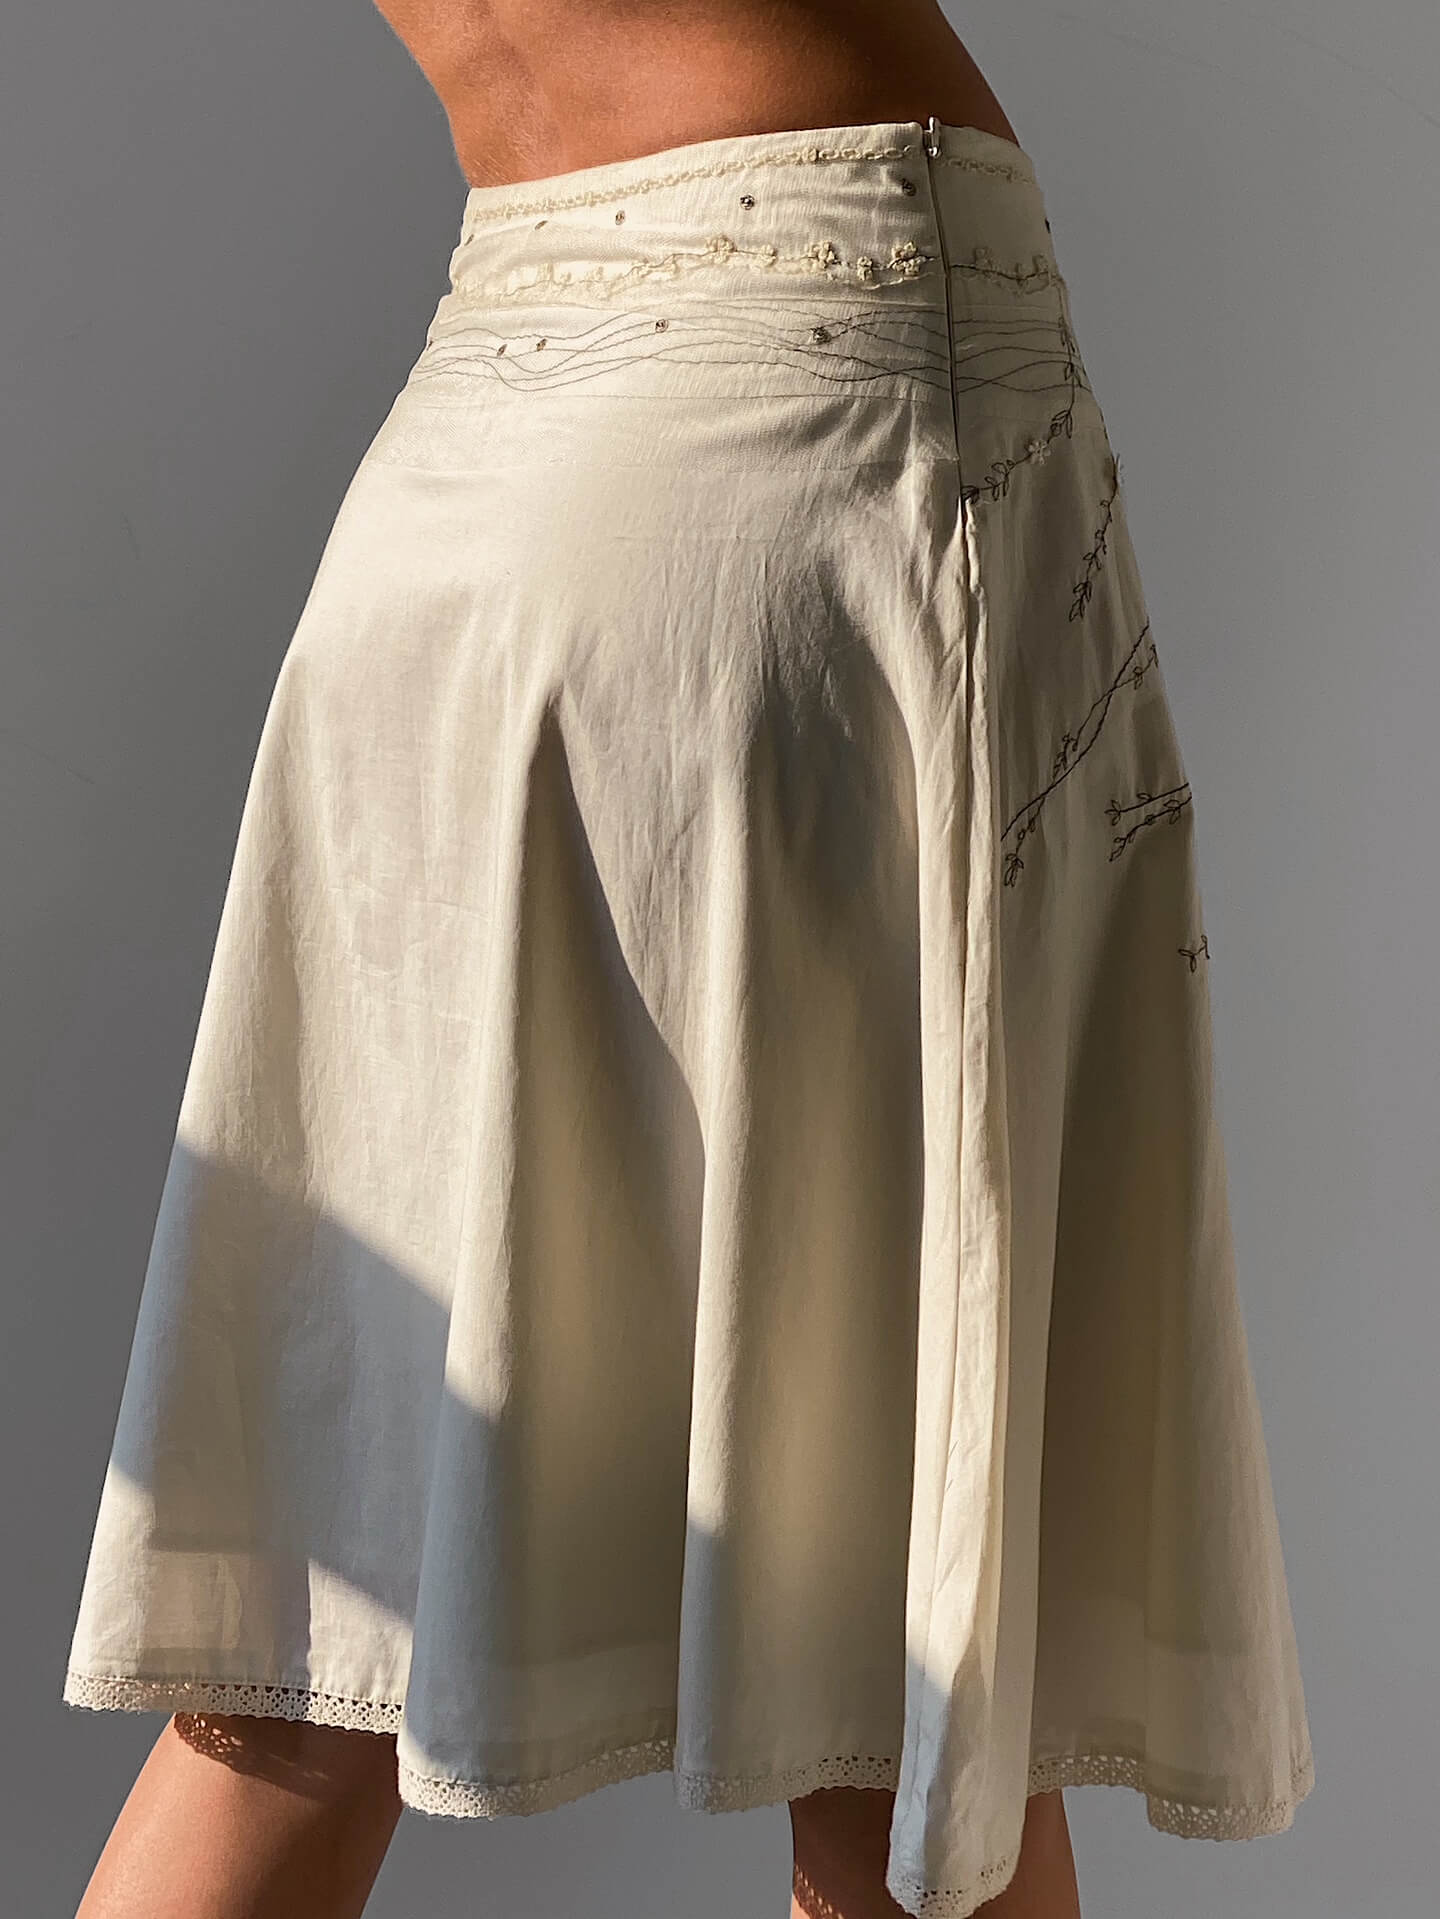 Vintage Embroidered Flared Cotton Skirt | XS/S